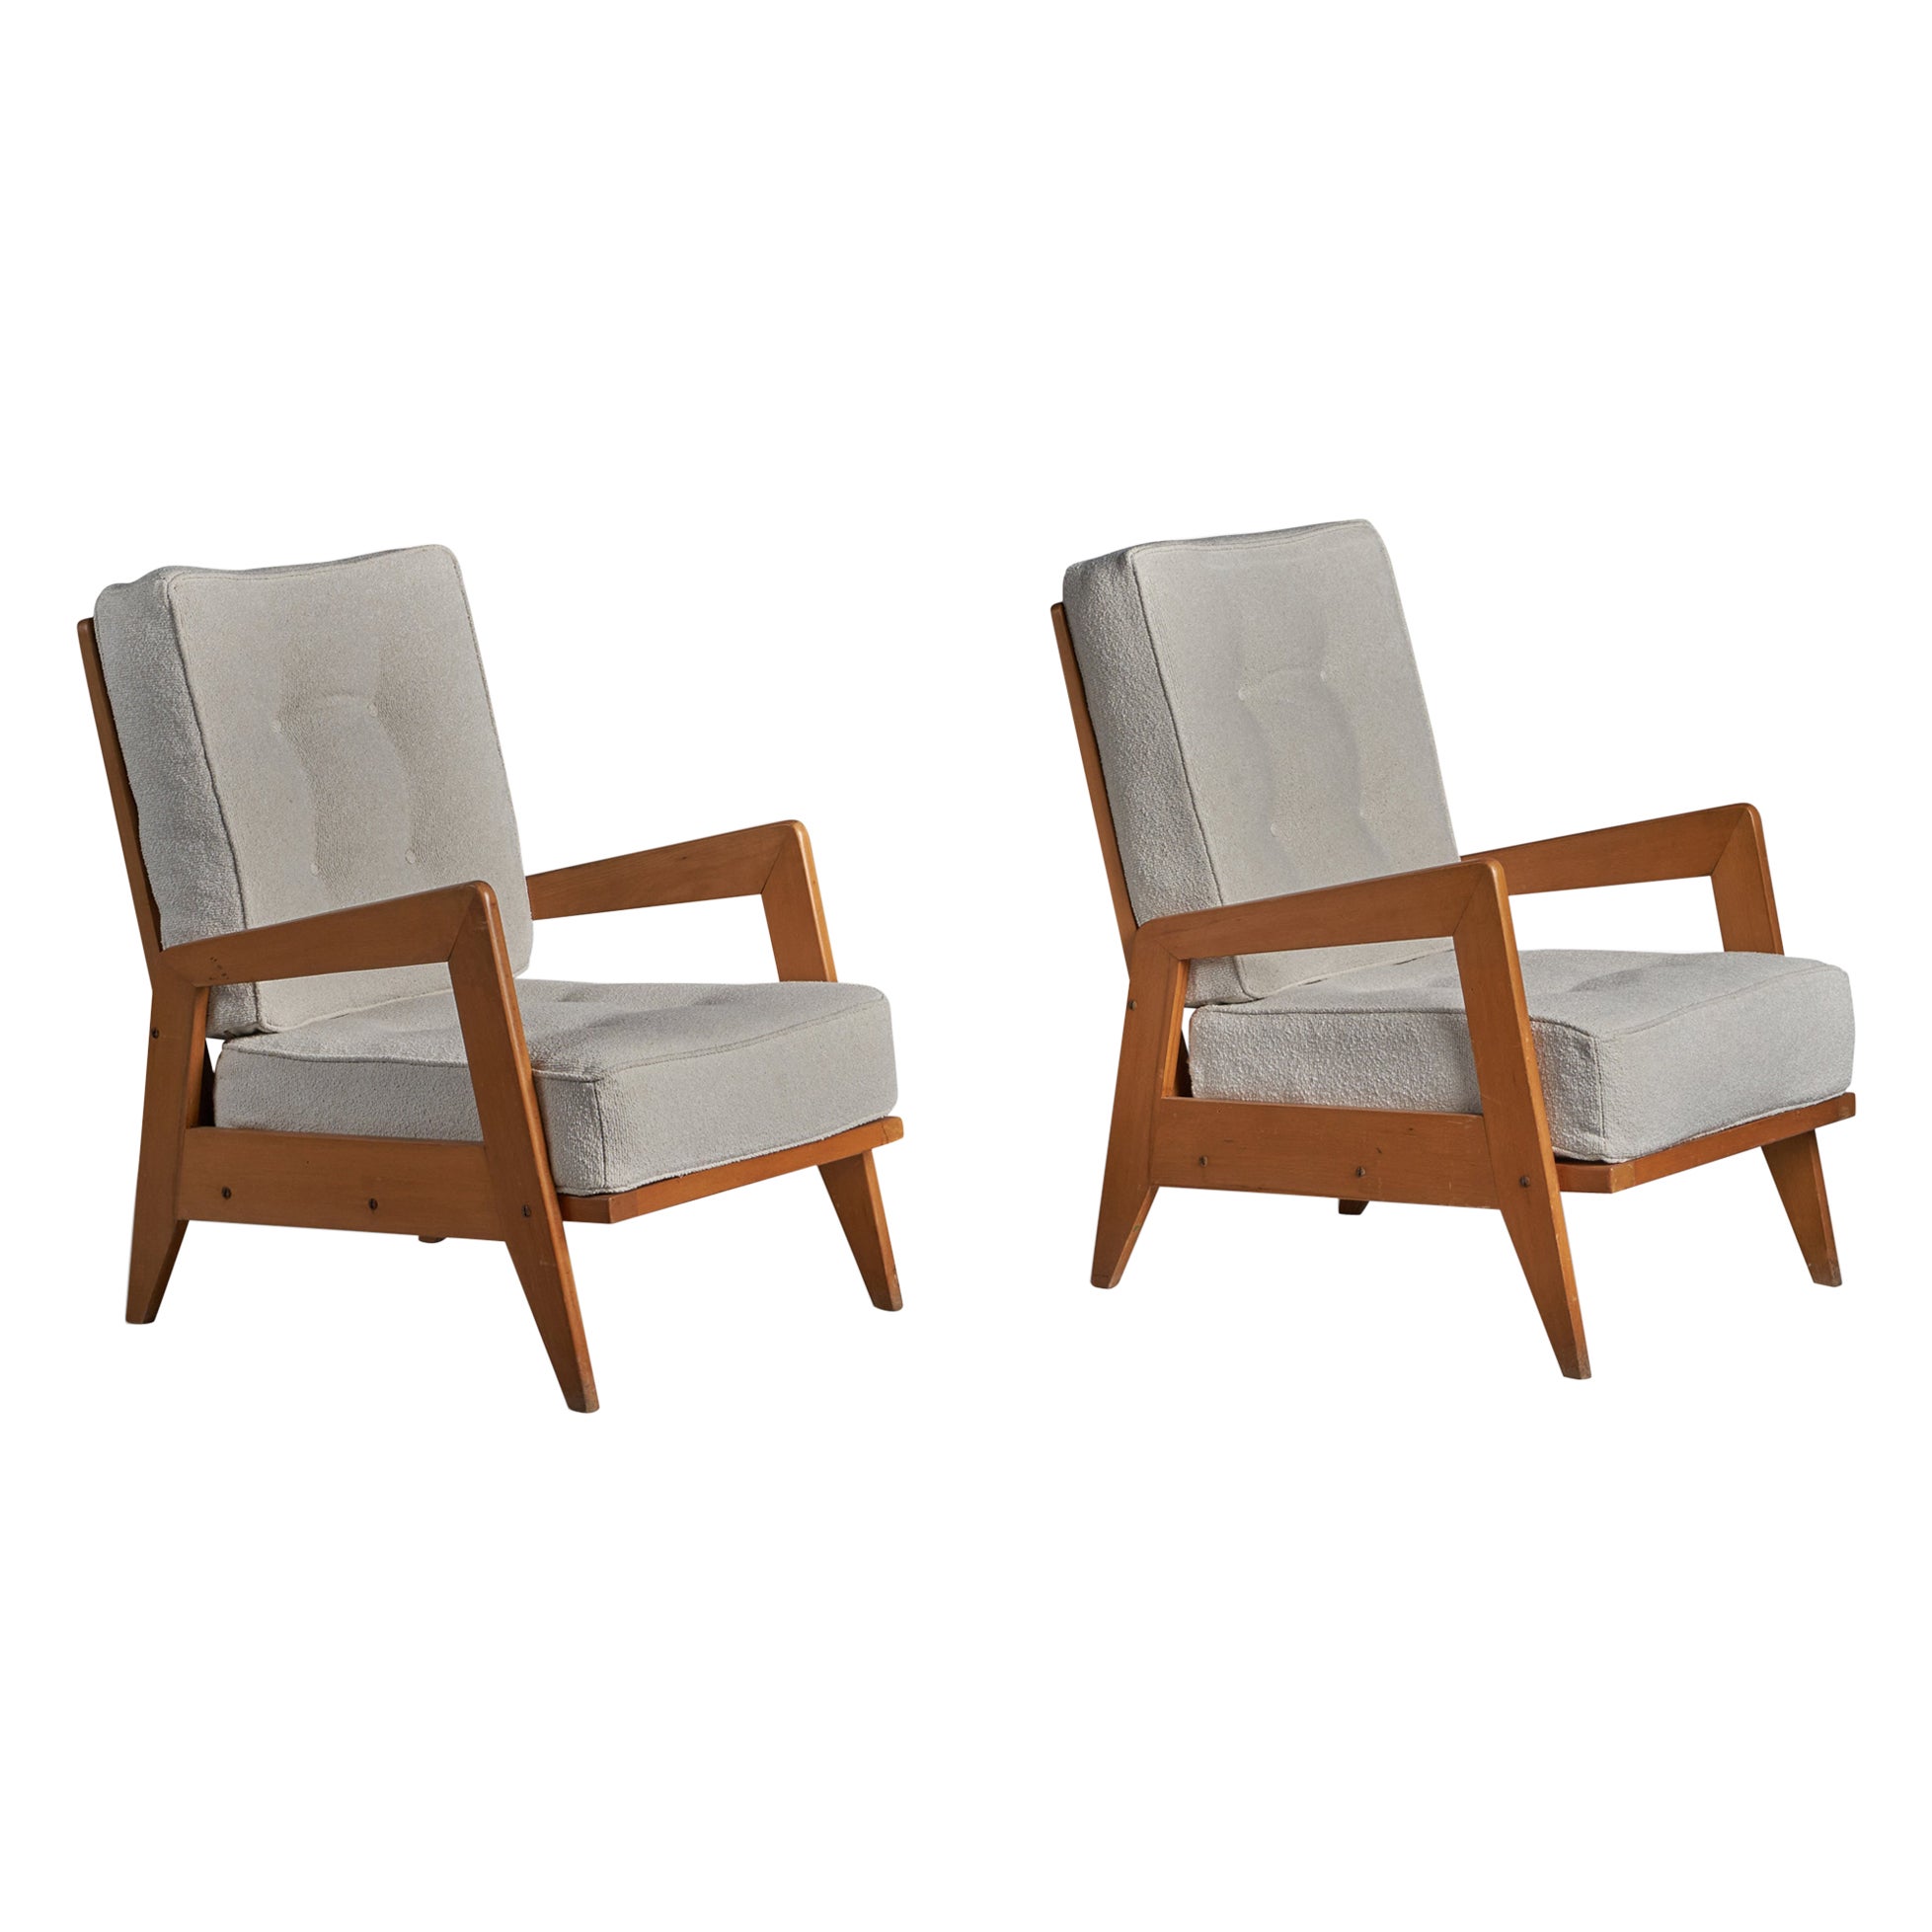 Design/One, chaises longues, Wood, Fabrice, Italie, années 1950